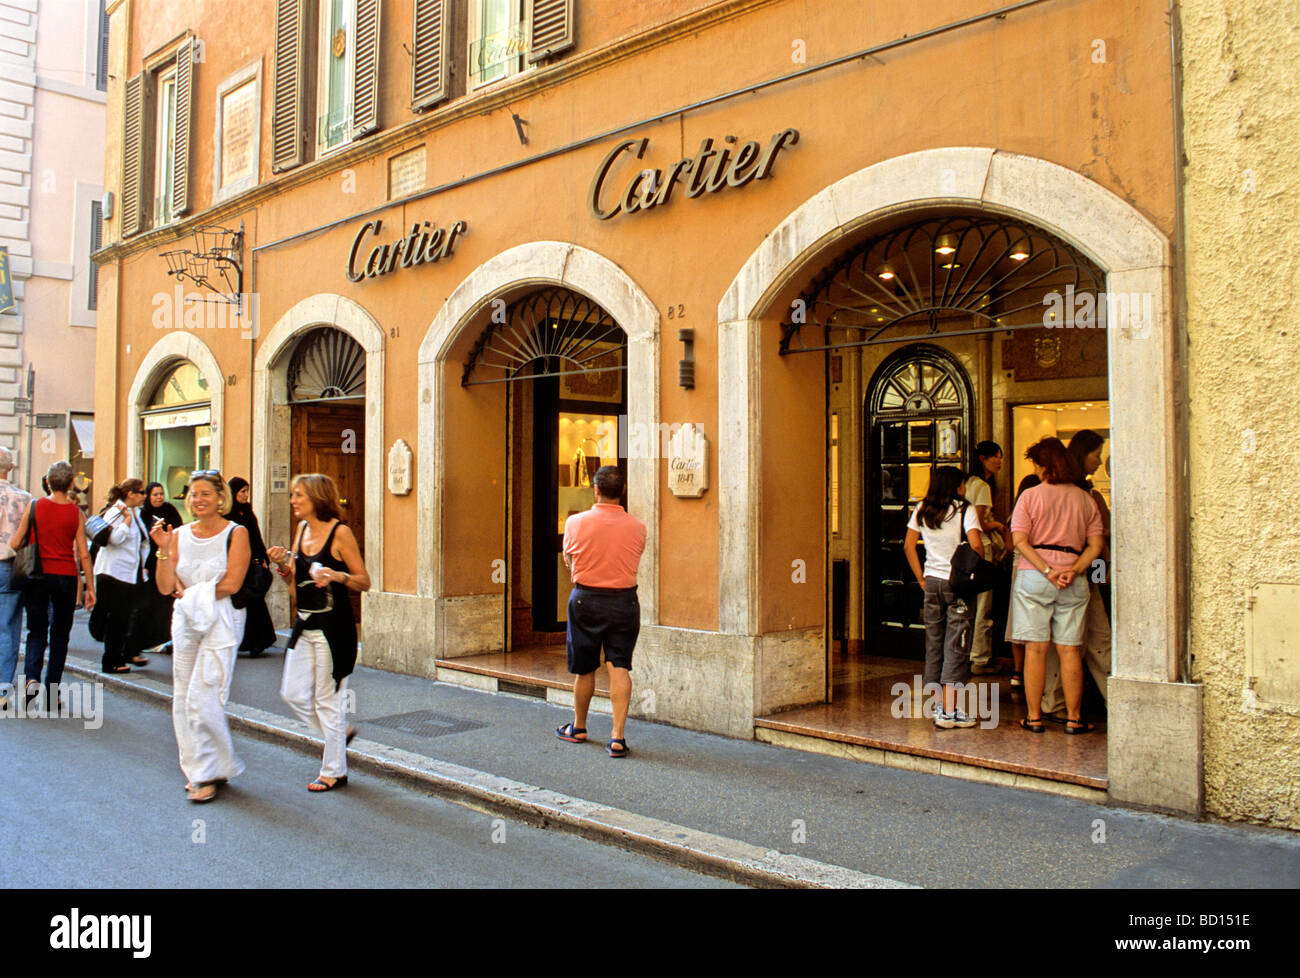 outlet cartier roma